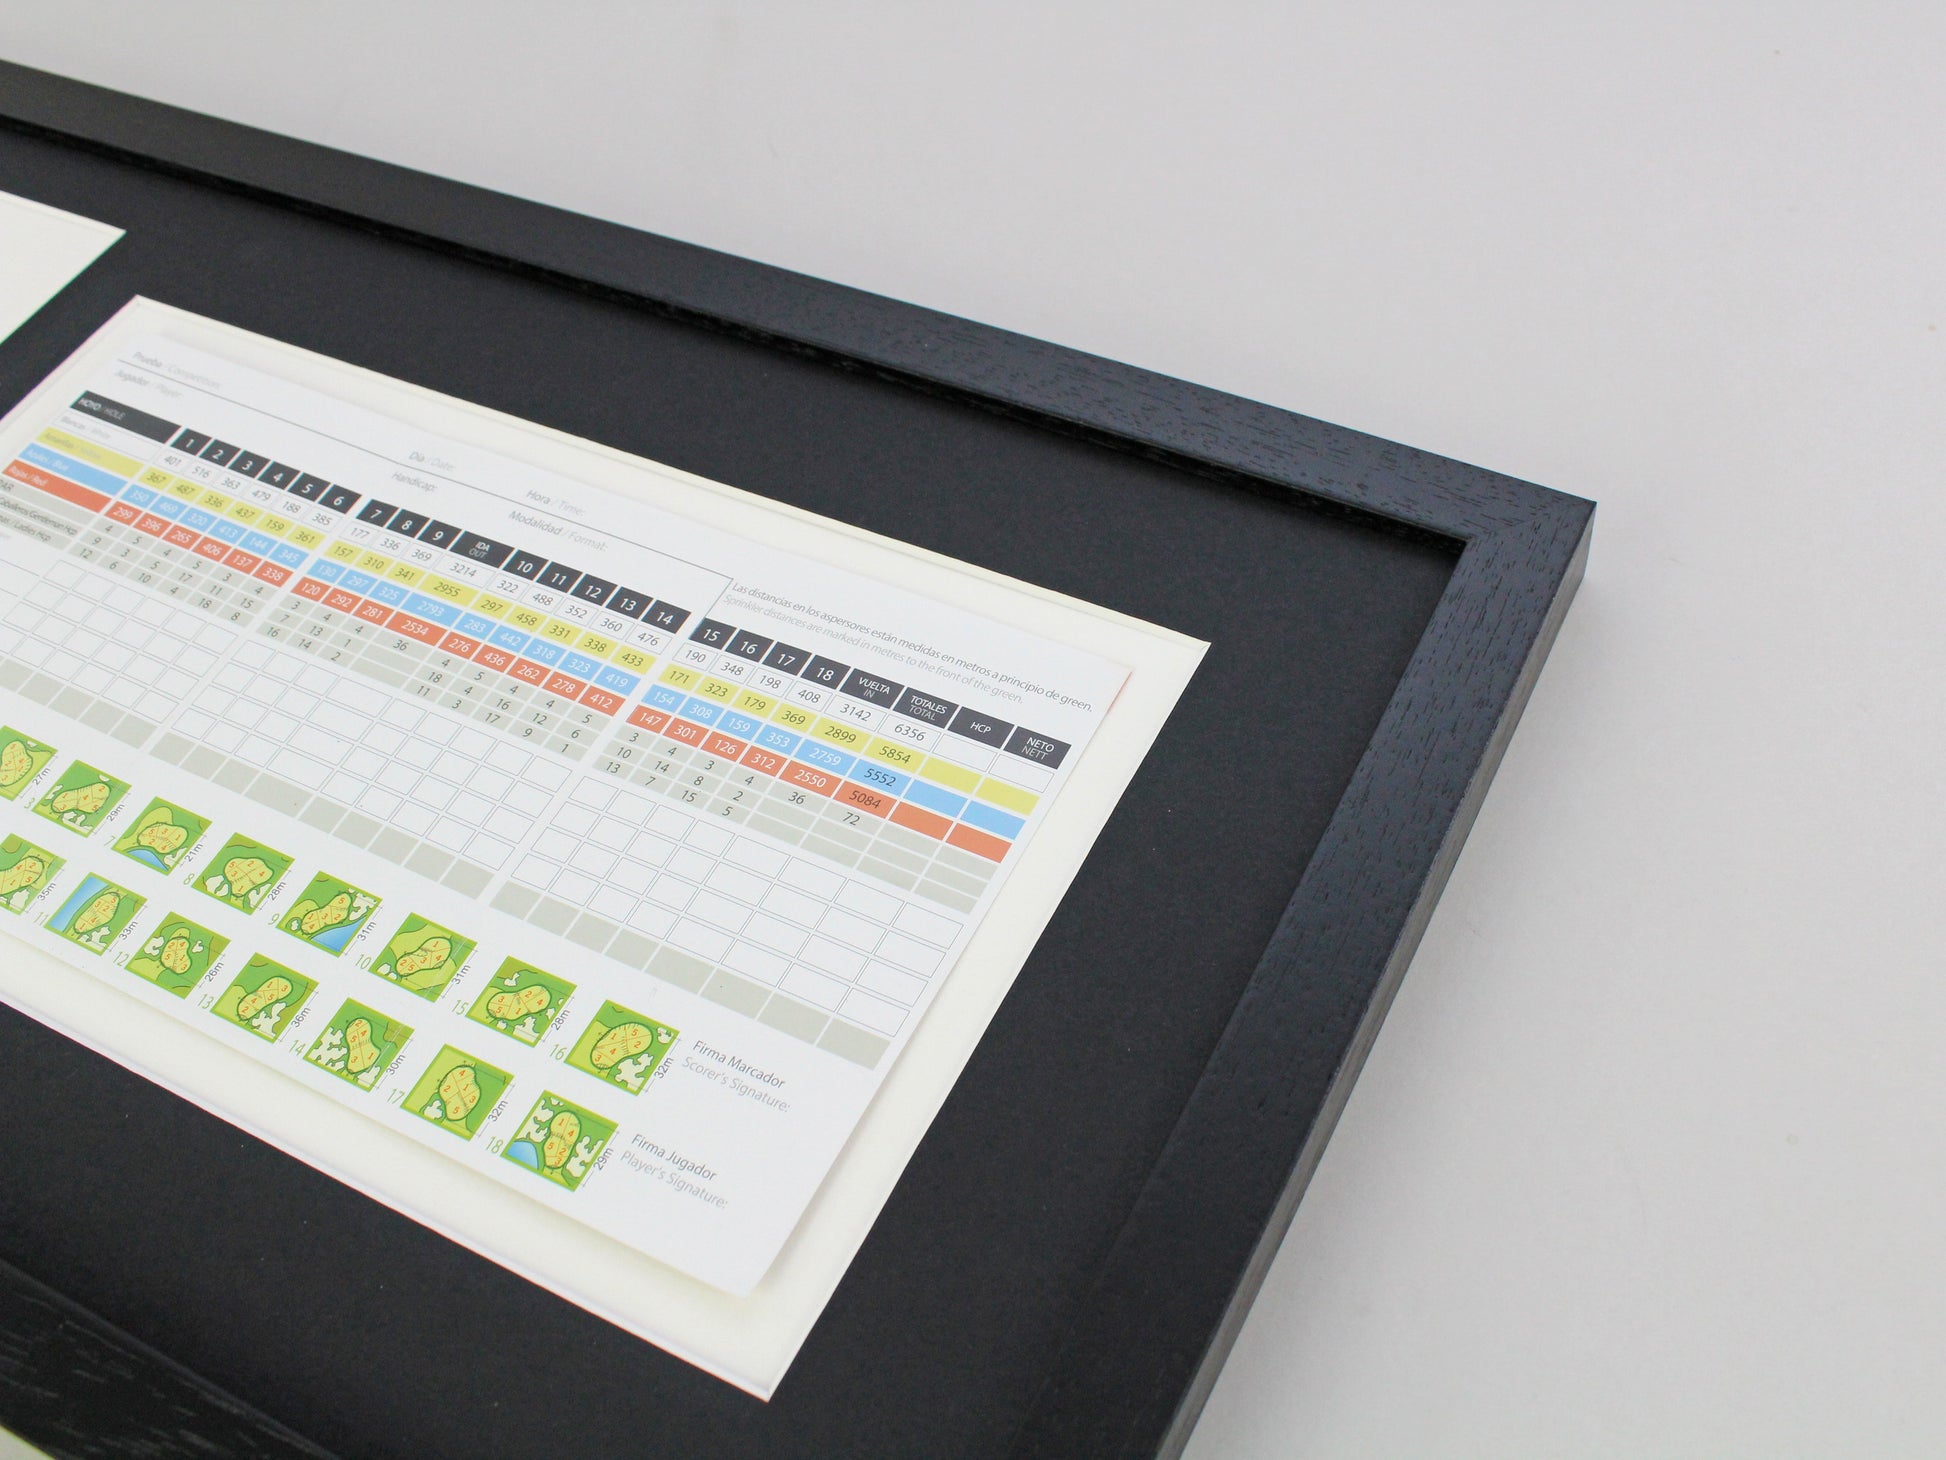 Personalised Golf Score Card Display Frame, With 6x4" Photo. 30x40cm Frame | Score Card sizes can vary - Check your size before purchase. - PhotoFramesandMore - Wooden Picture Frames